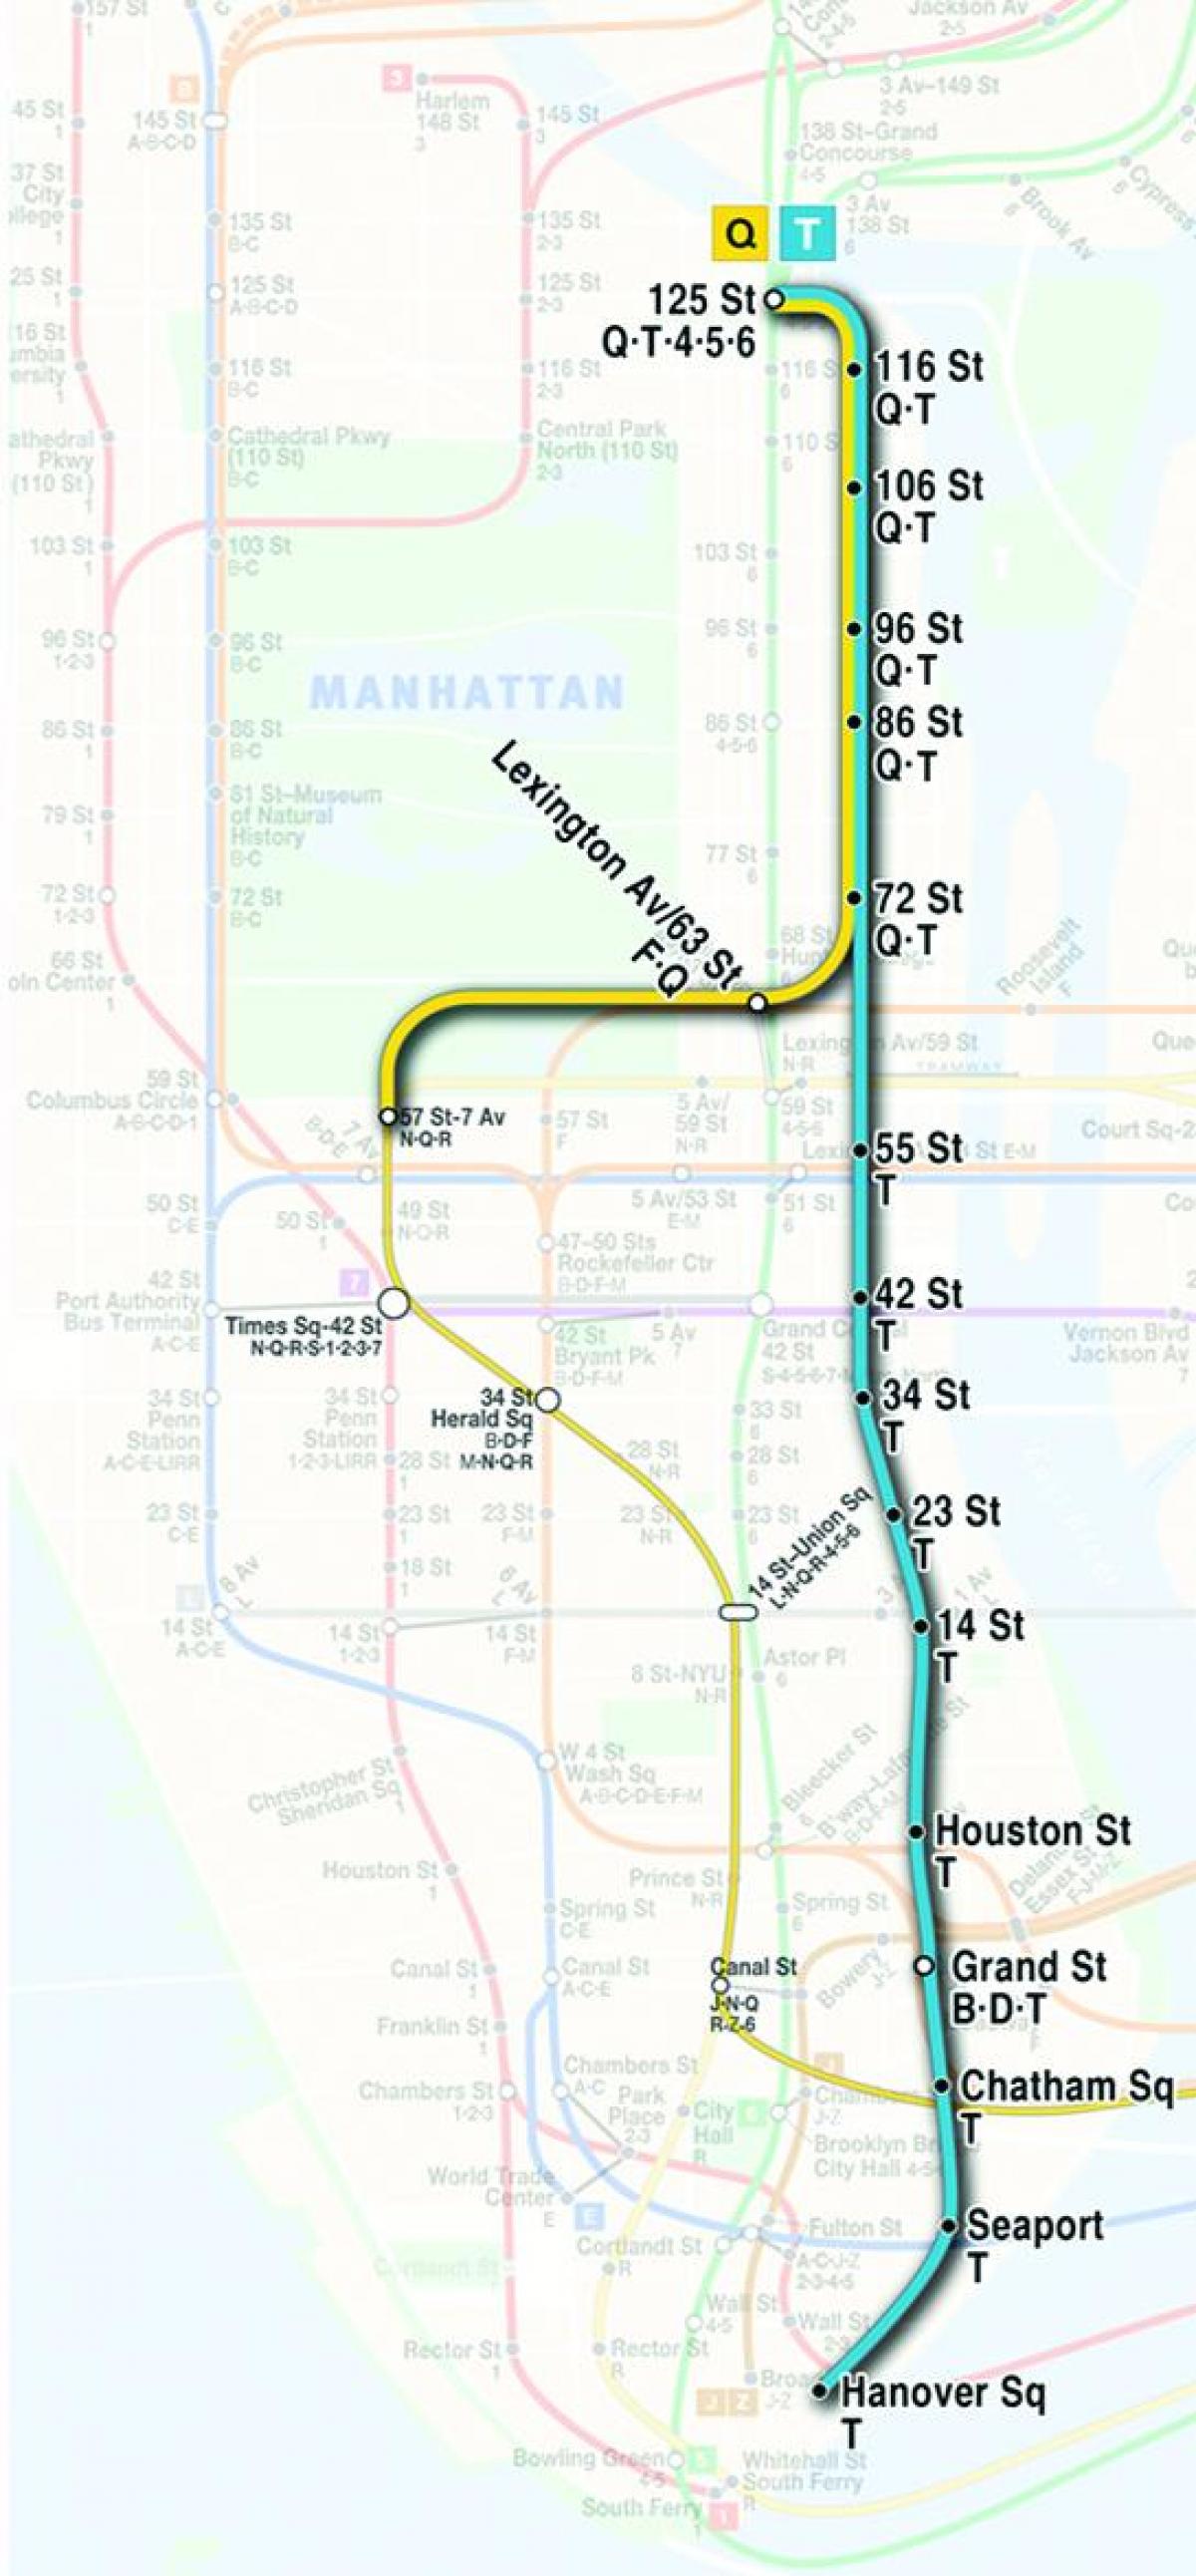 map of second avenue subway